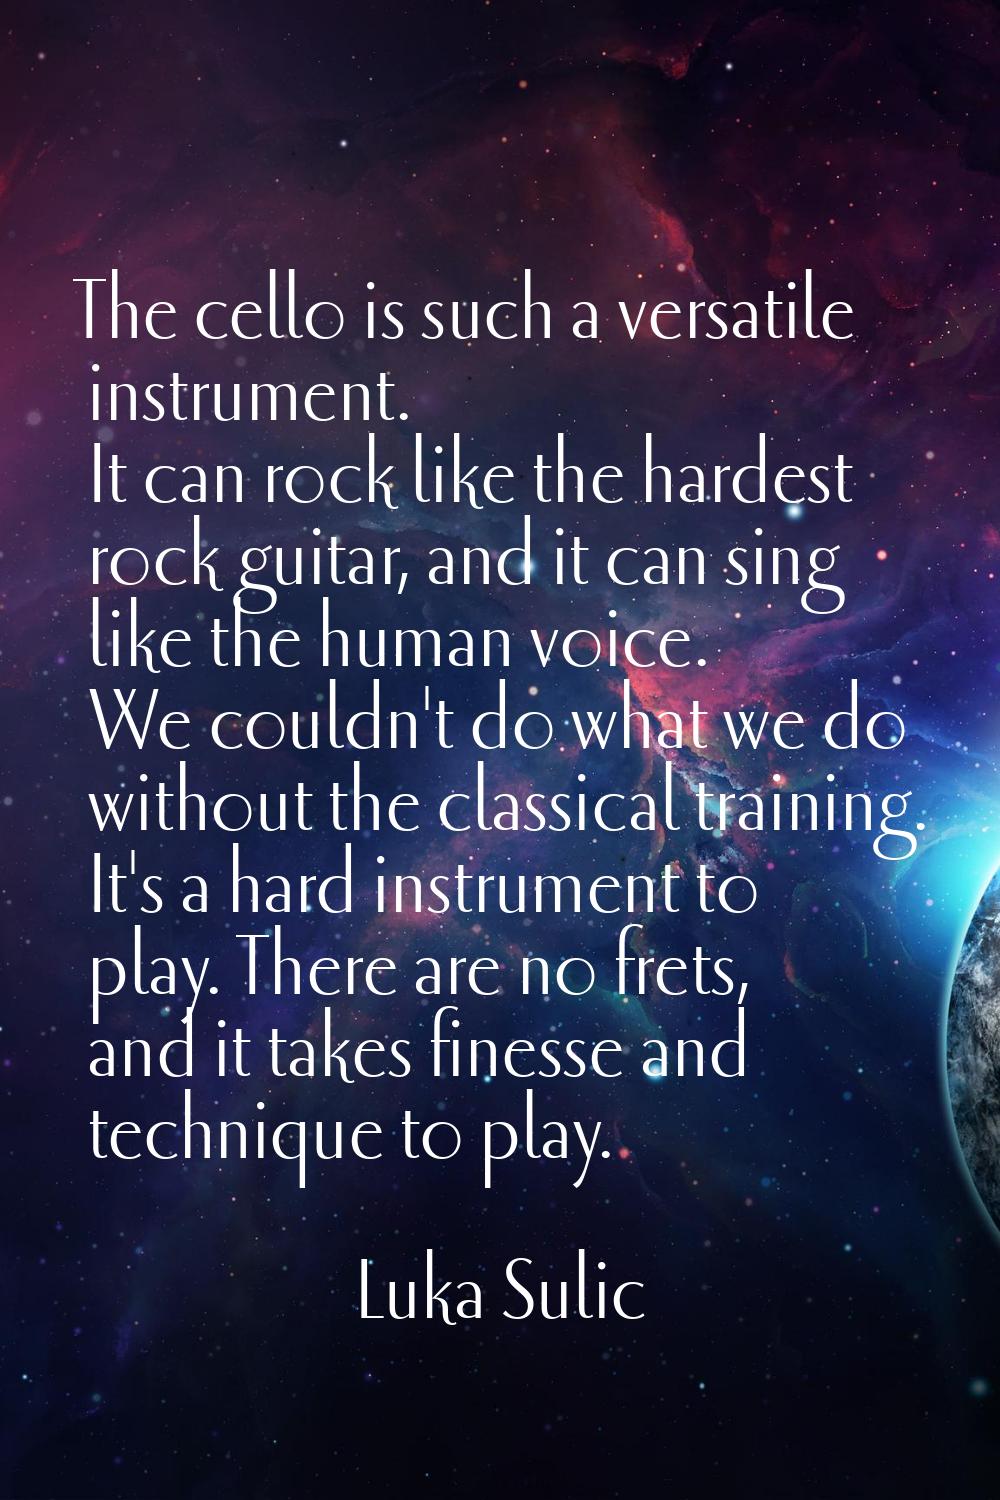 The cello is such a versatile instrument. It can rock like the hardest rock guitar, and it can sing